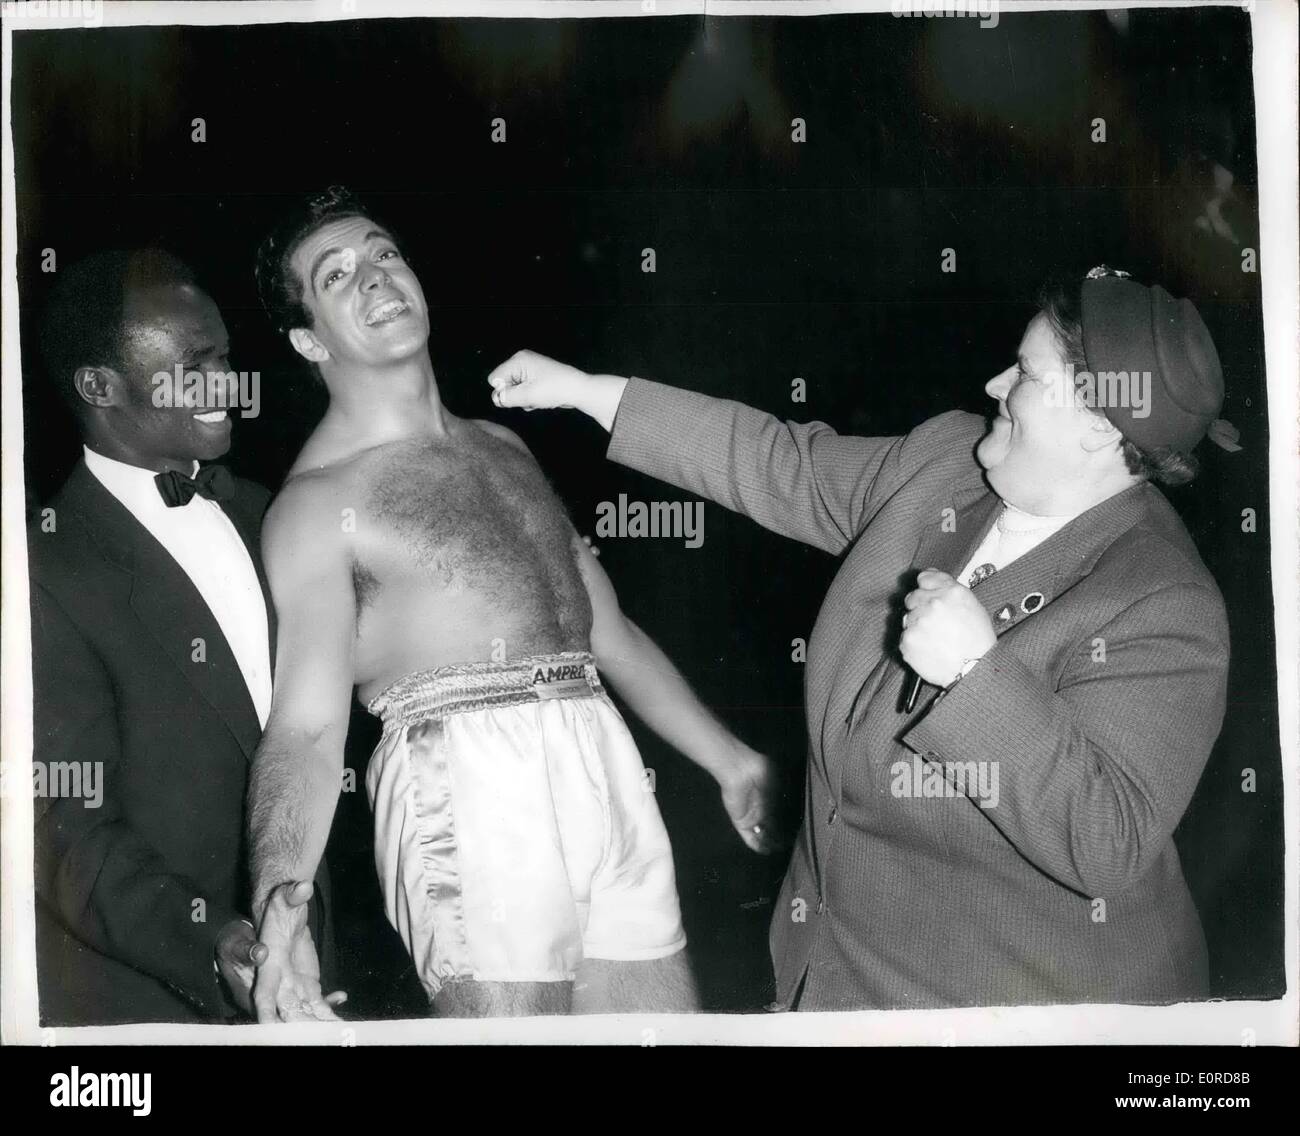 Feb. 02, 1959 - Frankie Vaughan in the ring at Pinewood. One of the most unusual sequences over shot at Pinewood, was filmed today for the Anna Neagle production for the Rank Organisation, ''The Heart of a Man'', which stars Frankie Vaughan, Anne Heywood and Tony Britton. The sequence was a full-scale Variety Club of Great Britain Charity Boxing Tournament , in which Frankie went several rounds with Pinewood's fight expert, Rupert Evans. The referee was world featherweight champion, Hogan 'Kid' Bassey. Photo Shows Mrs. Bessie Braddock, M.P Stock Photo